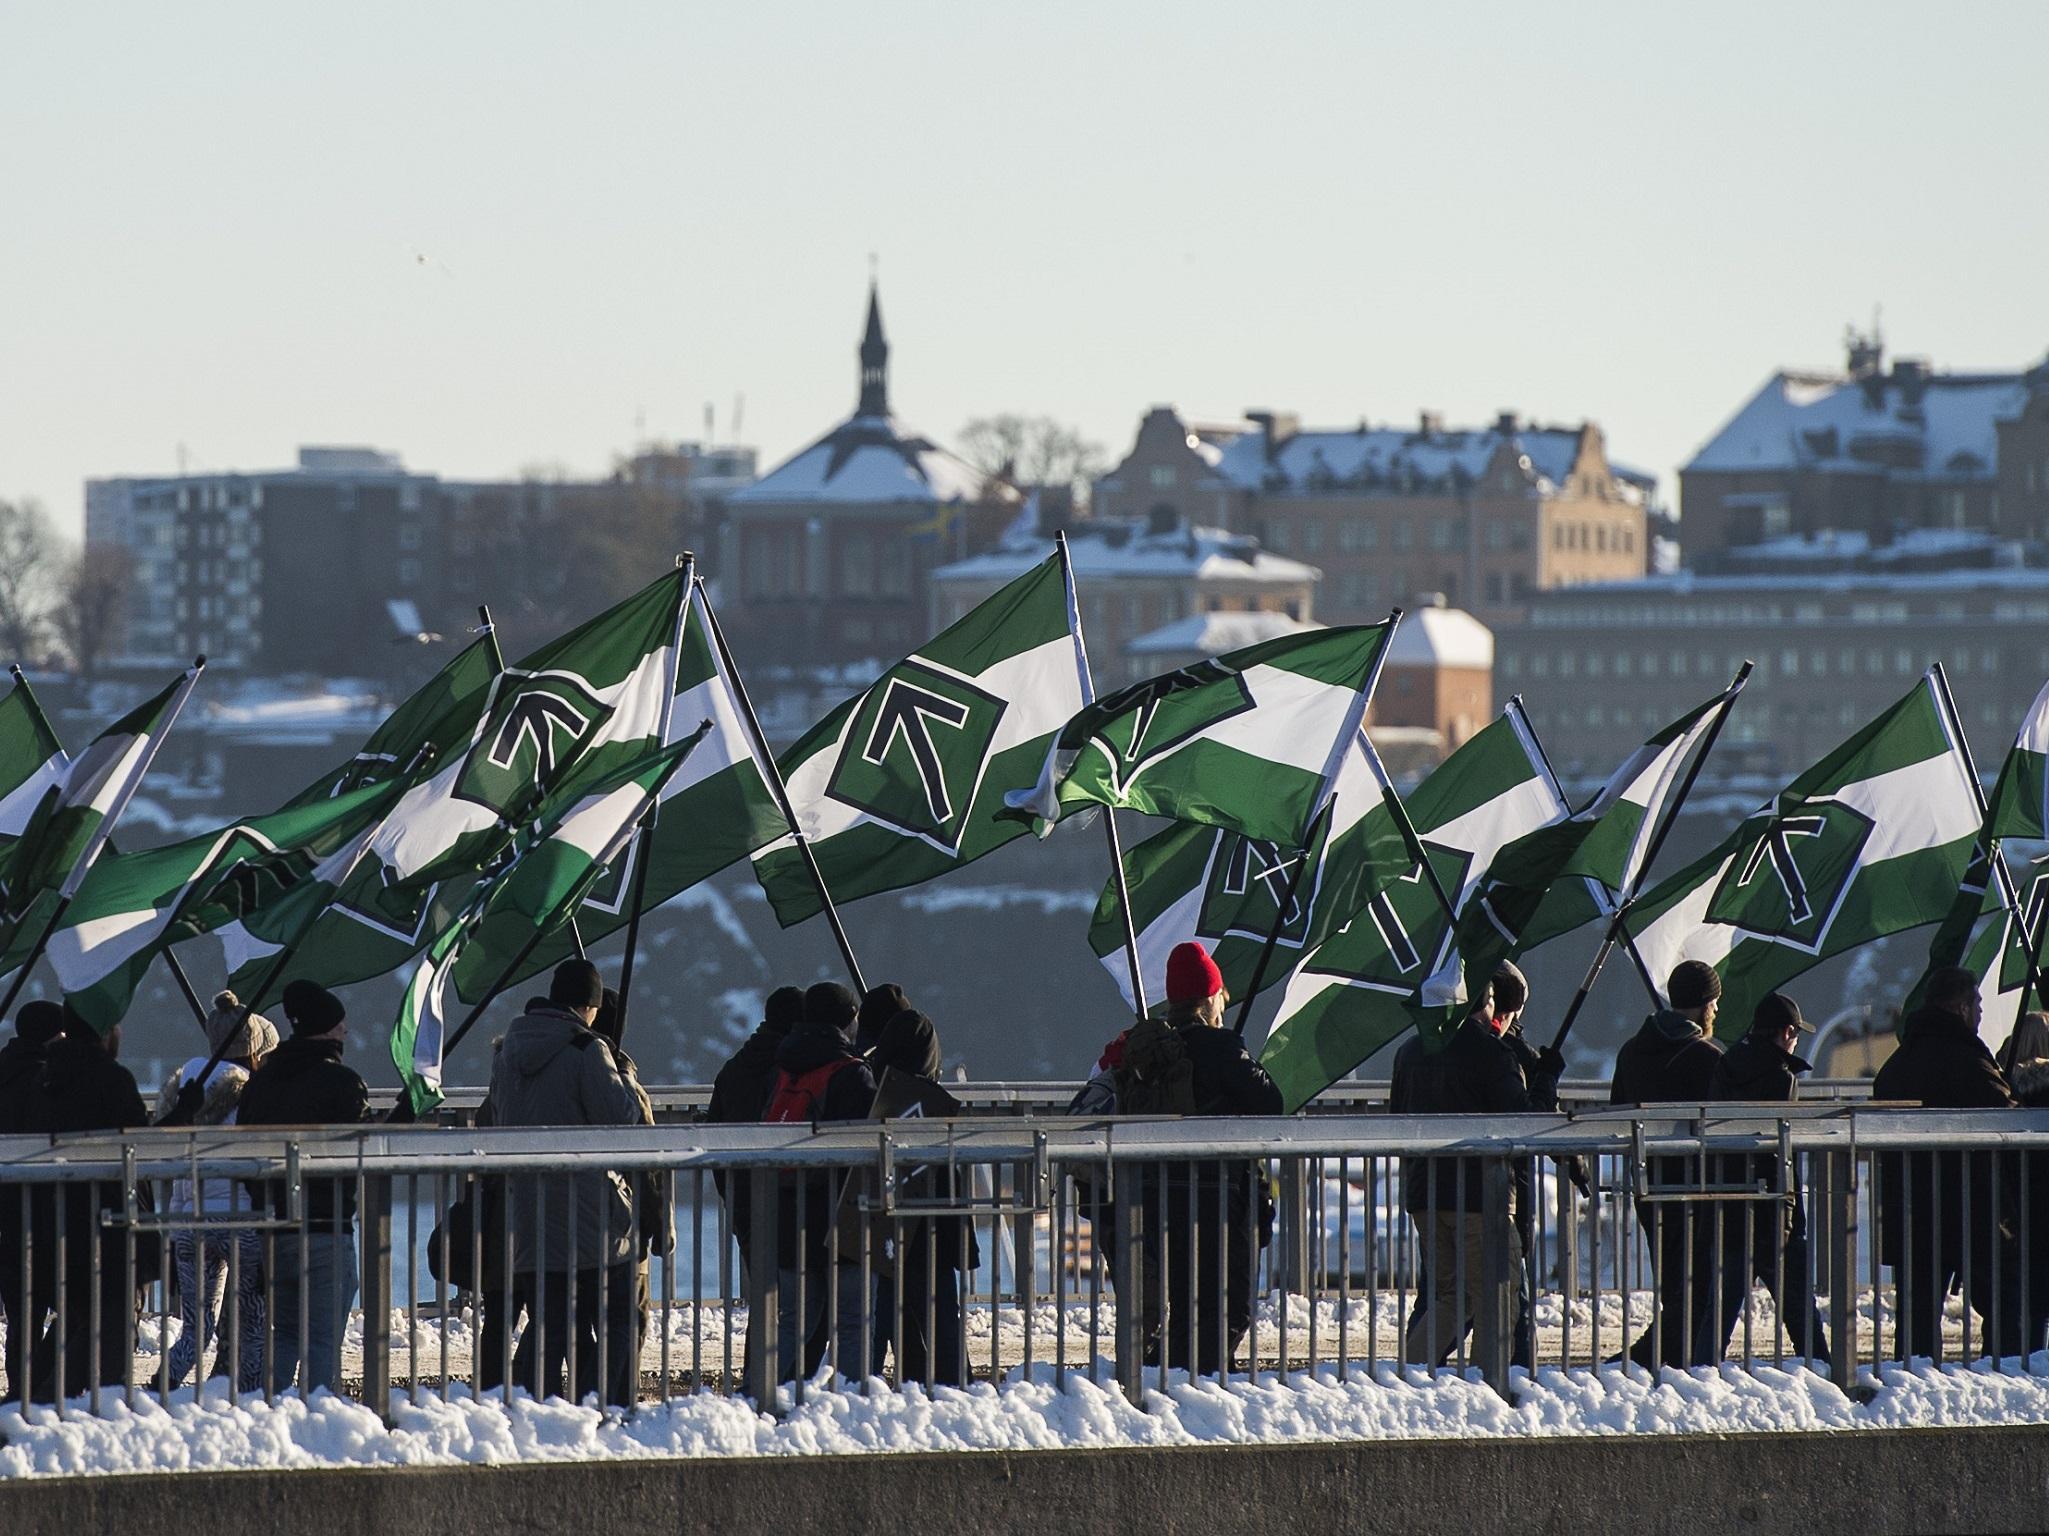 Nordic Resistance Movement supporters marching with flags bearing their 'Tyr rune' logo